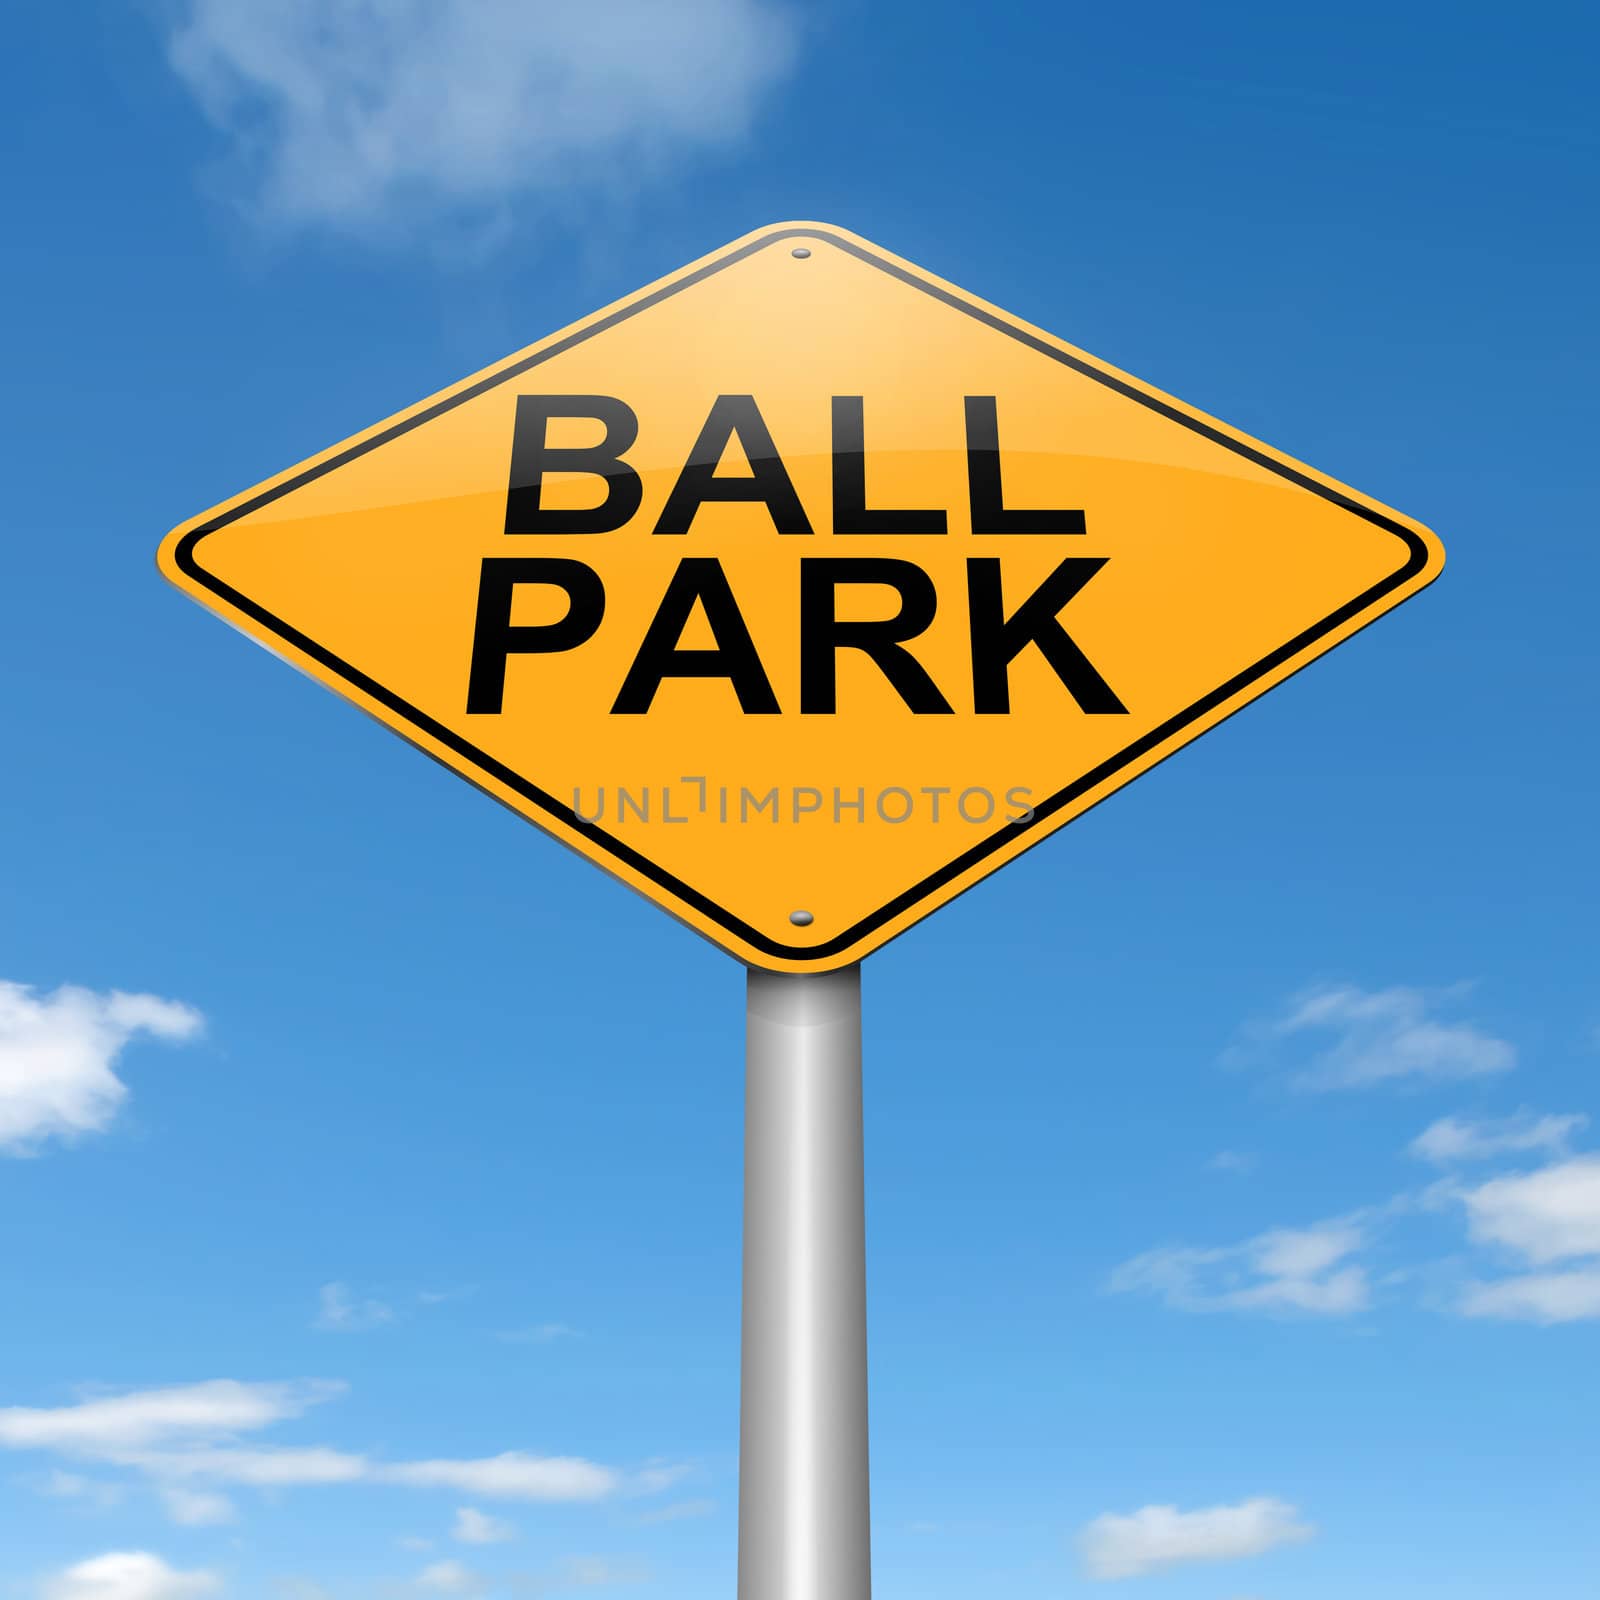 Illustration depicting a roadsign with a ball park concept. Sky background.